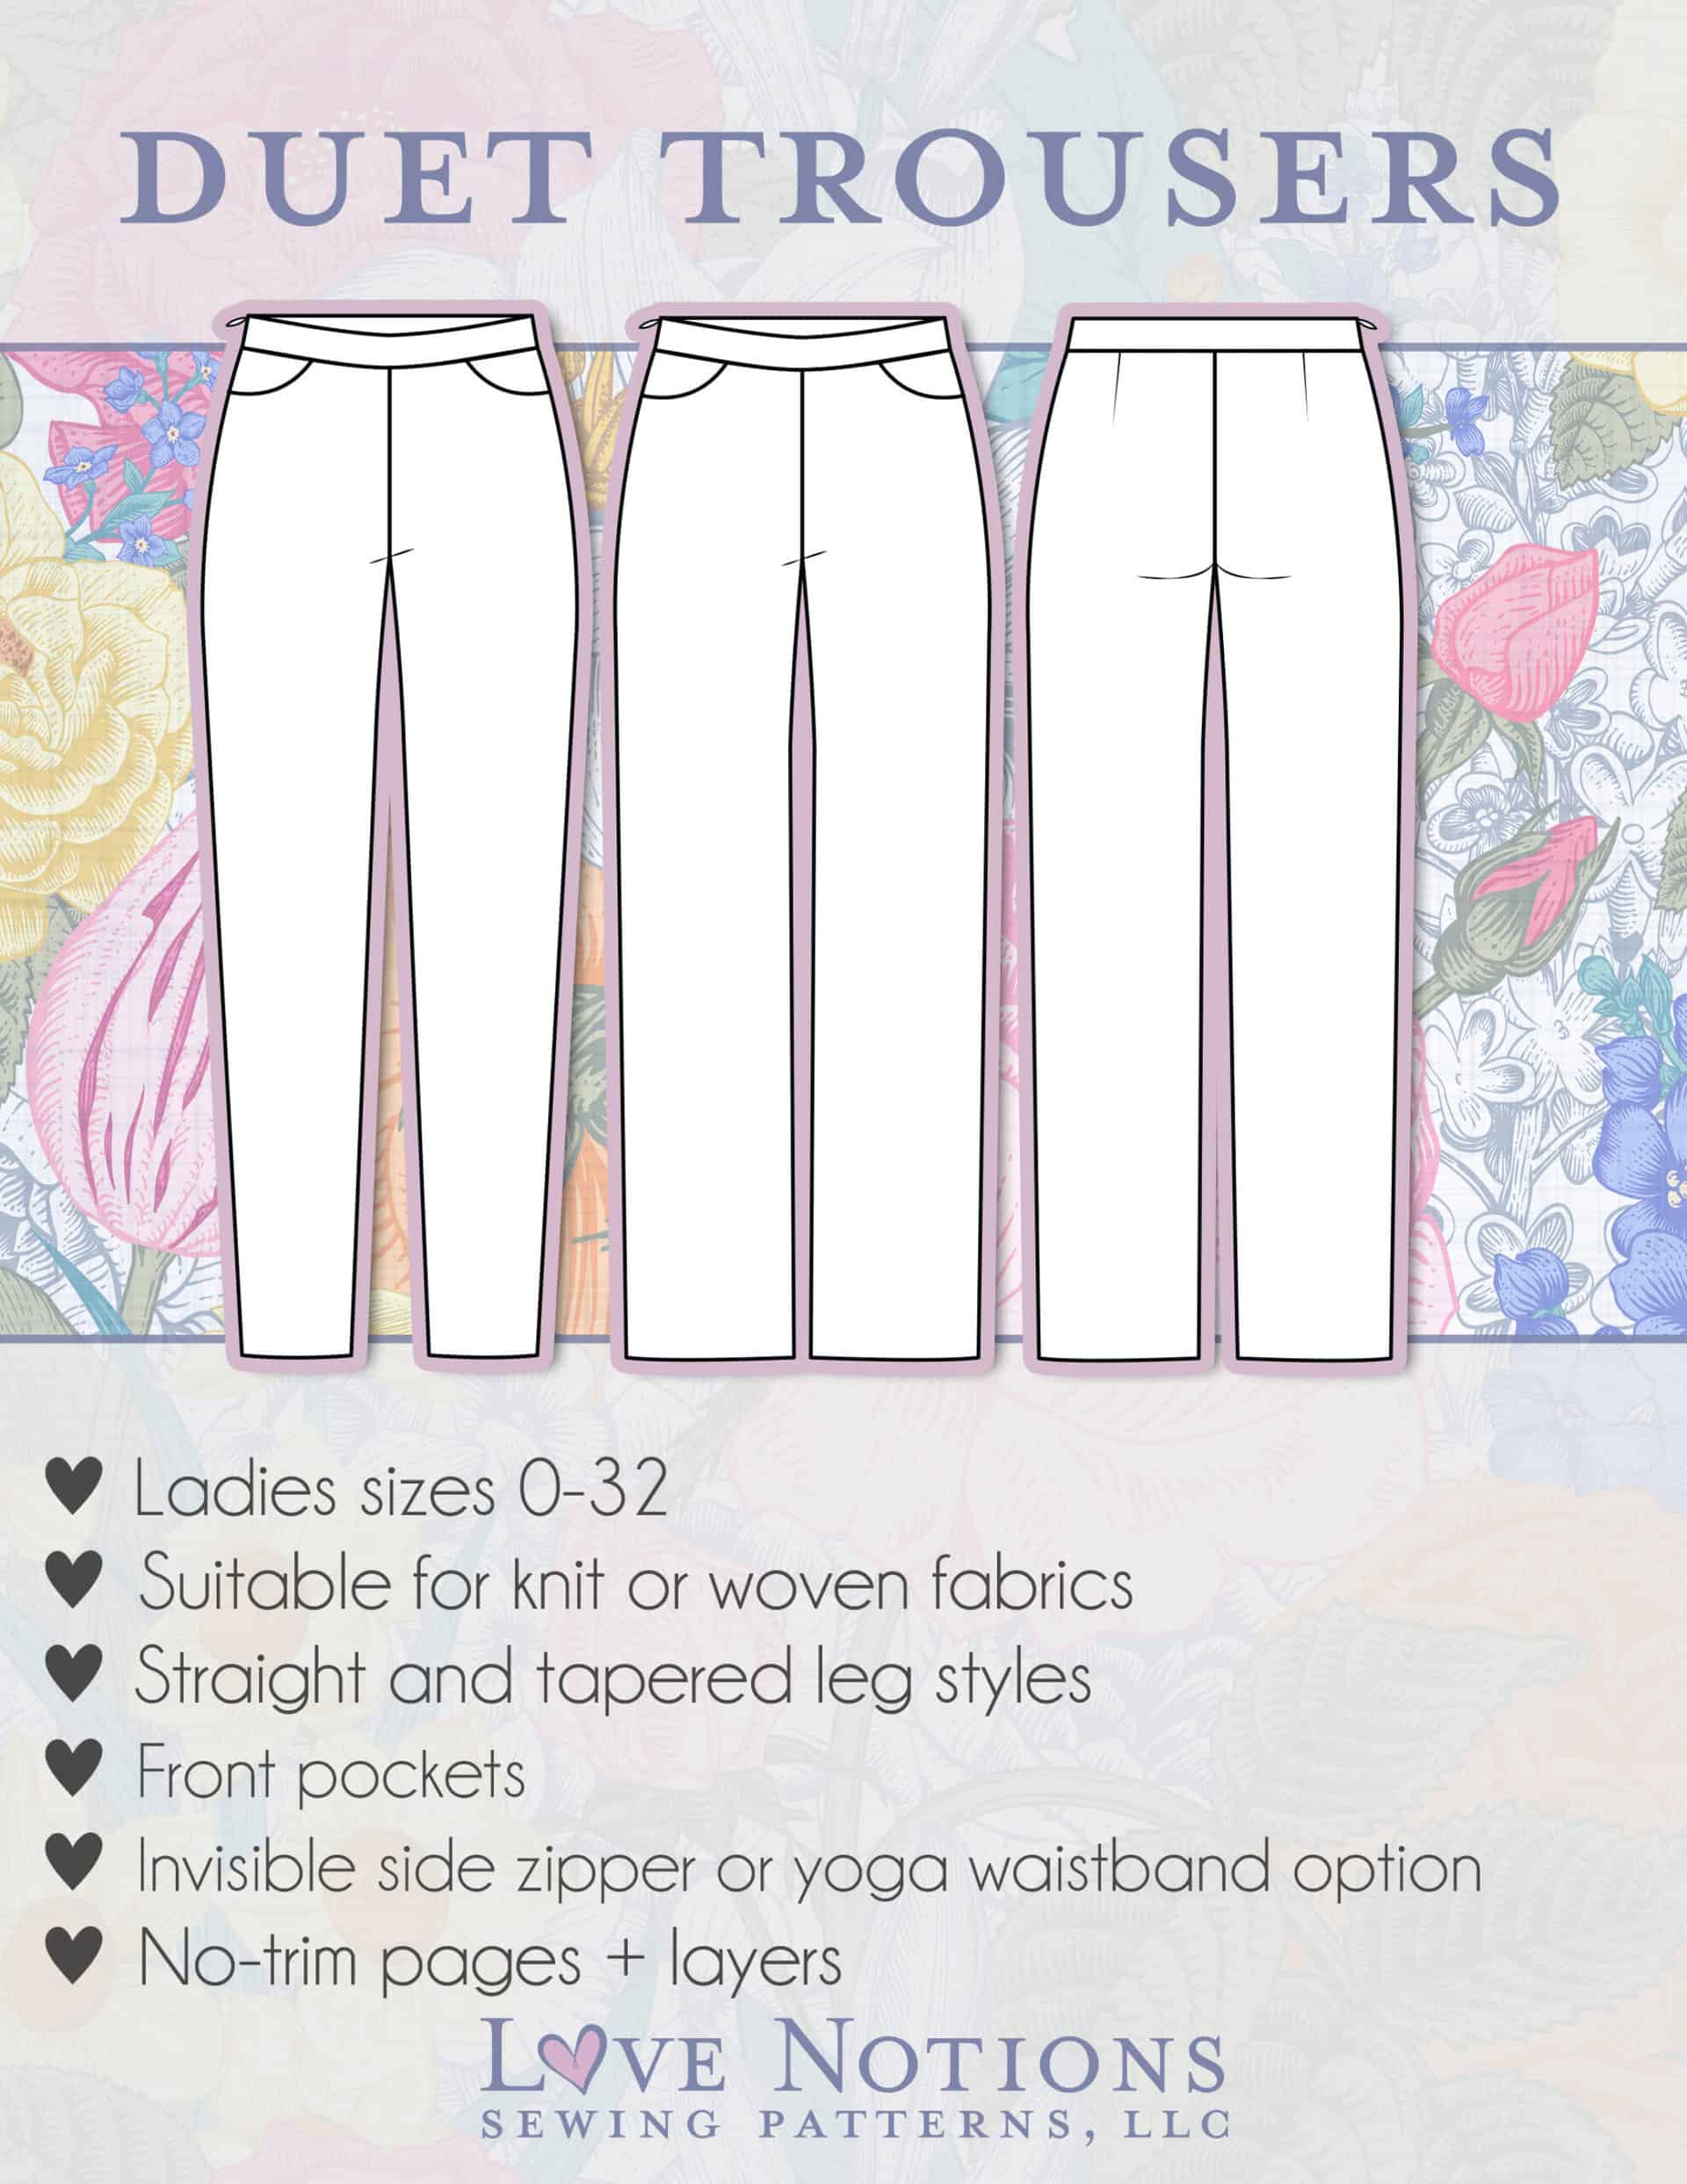 Duet Trousers pdf pattern for ladies by Love Notions Sewing